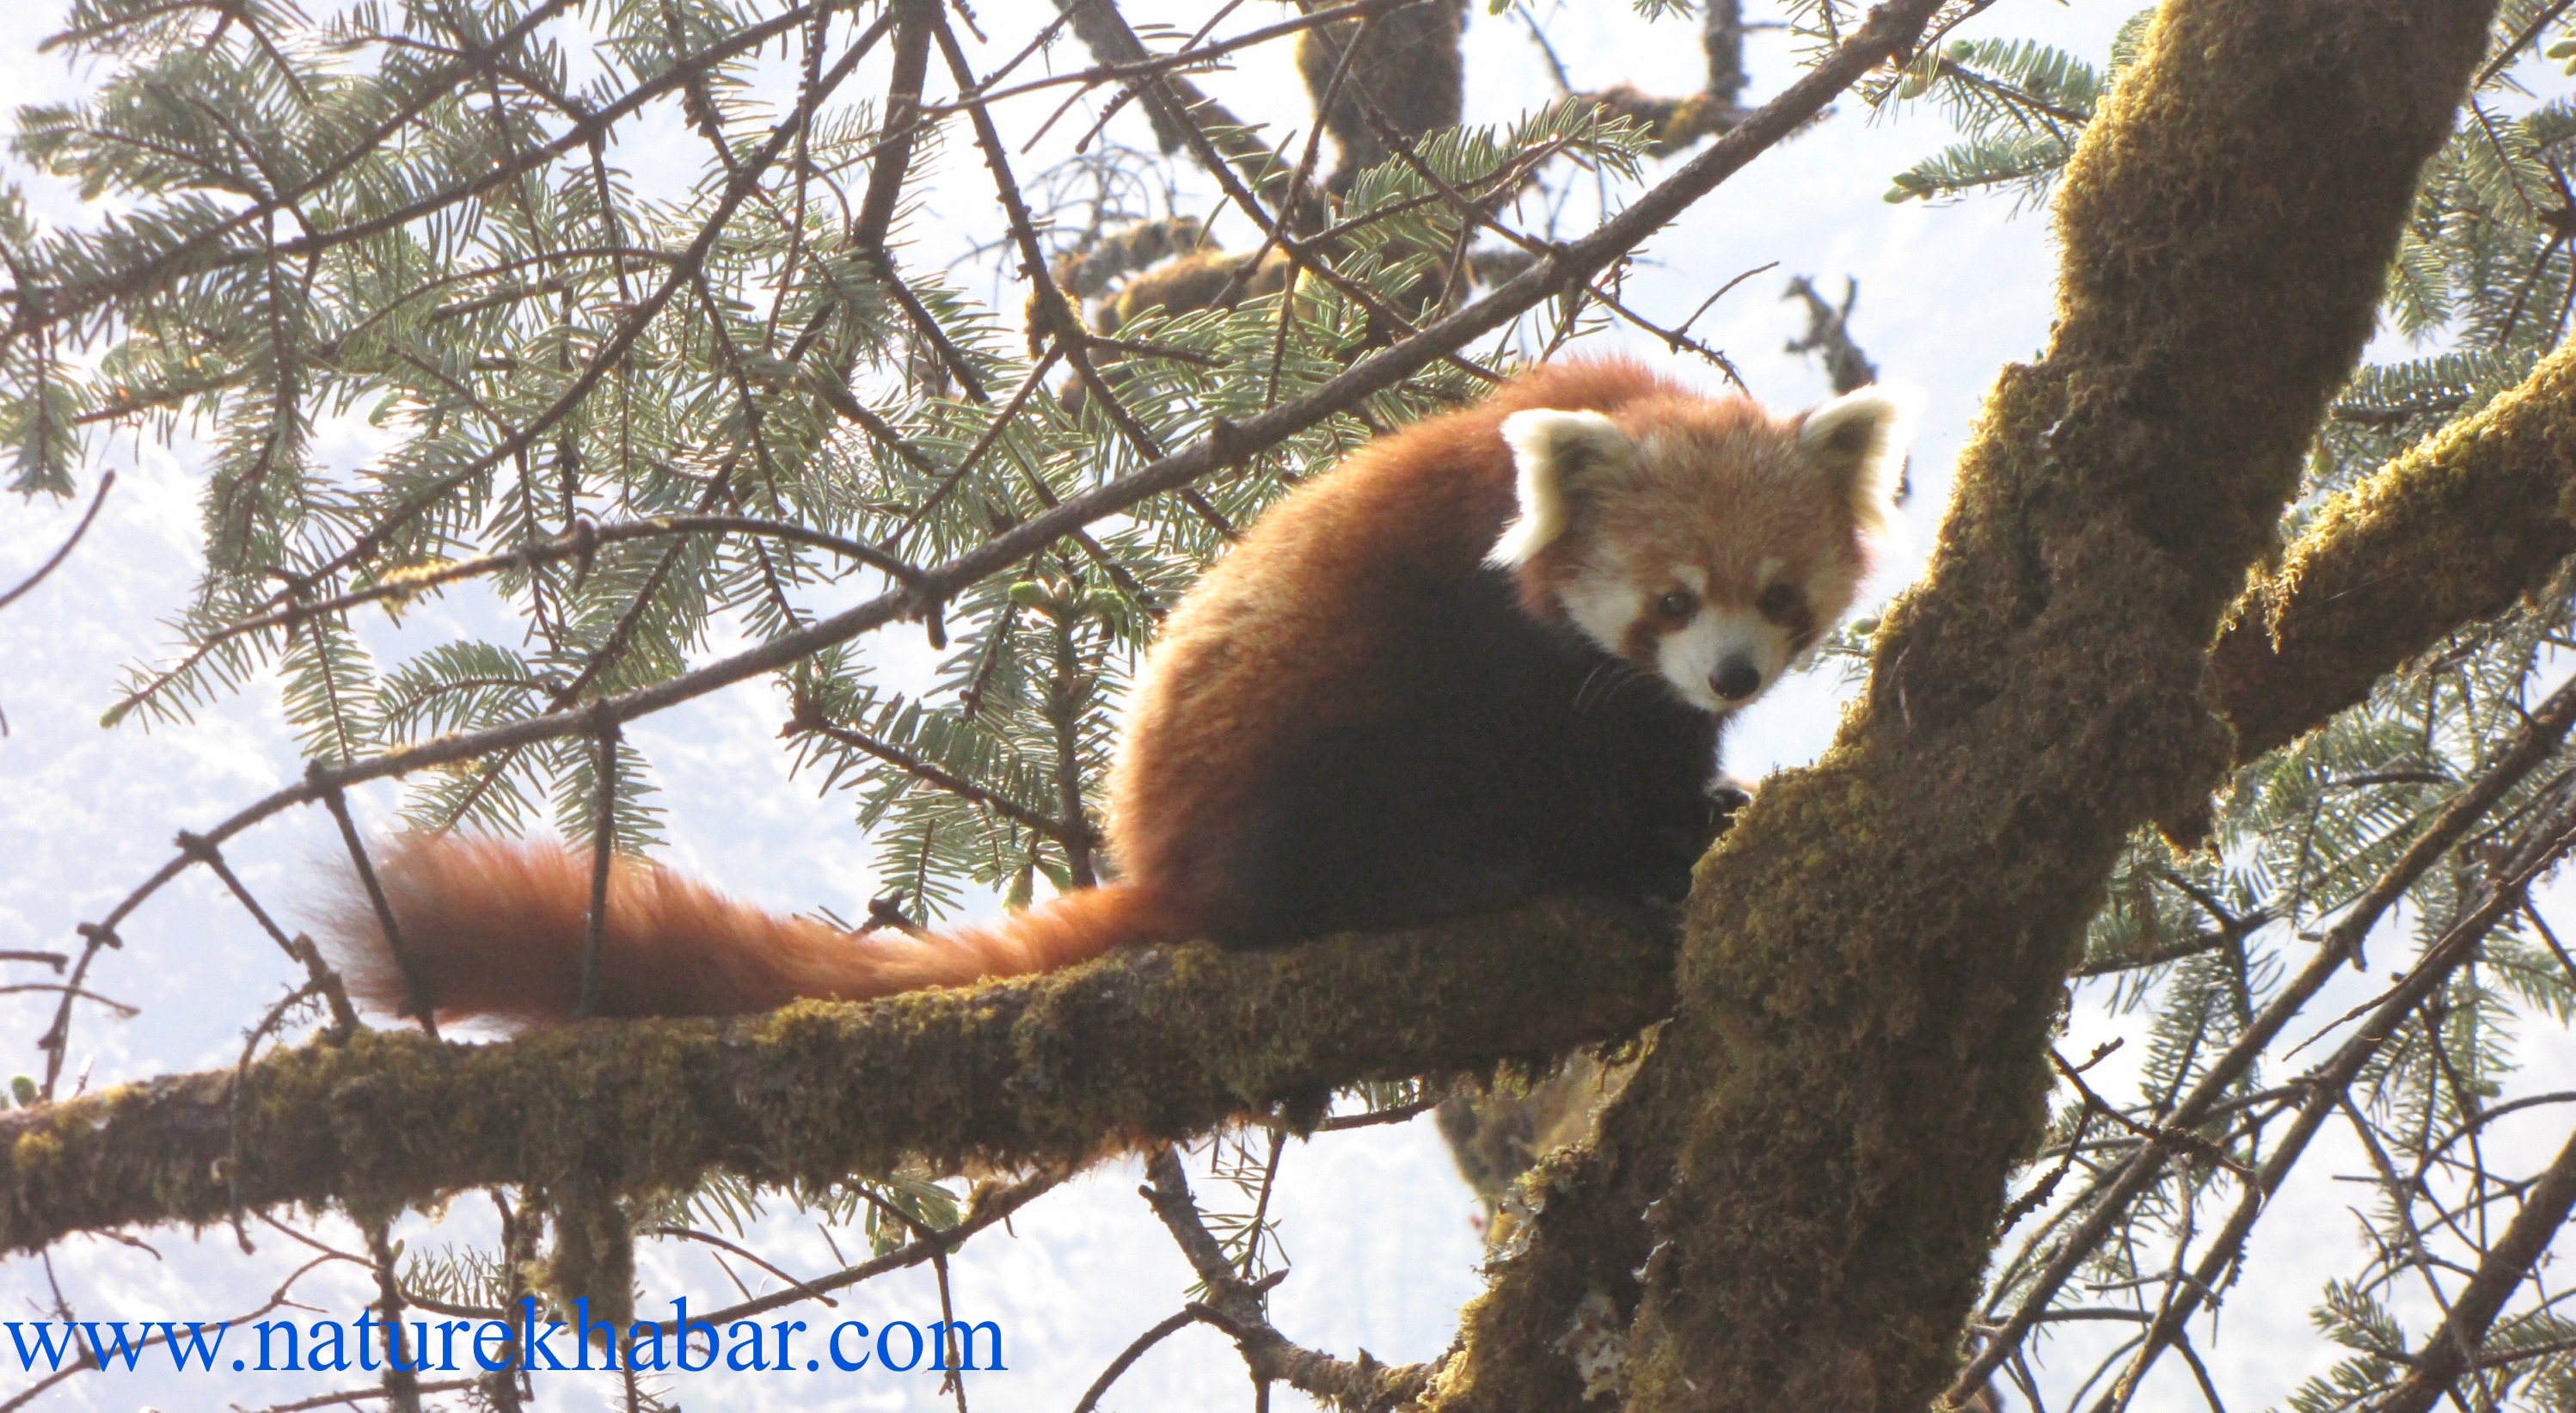 Local People have closed Jungle for red panda's breeding season - Nature Khabar2996 x 1643